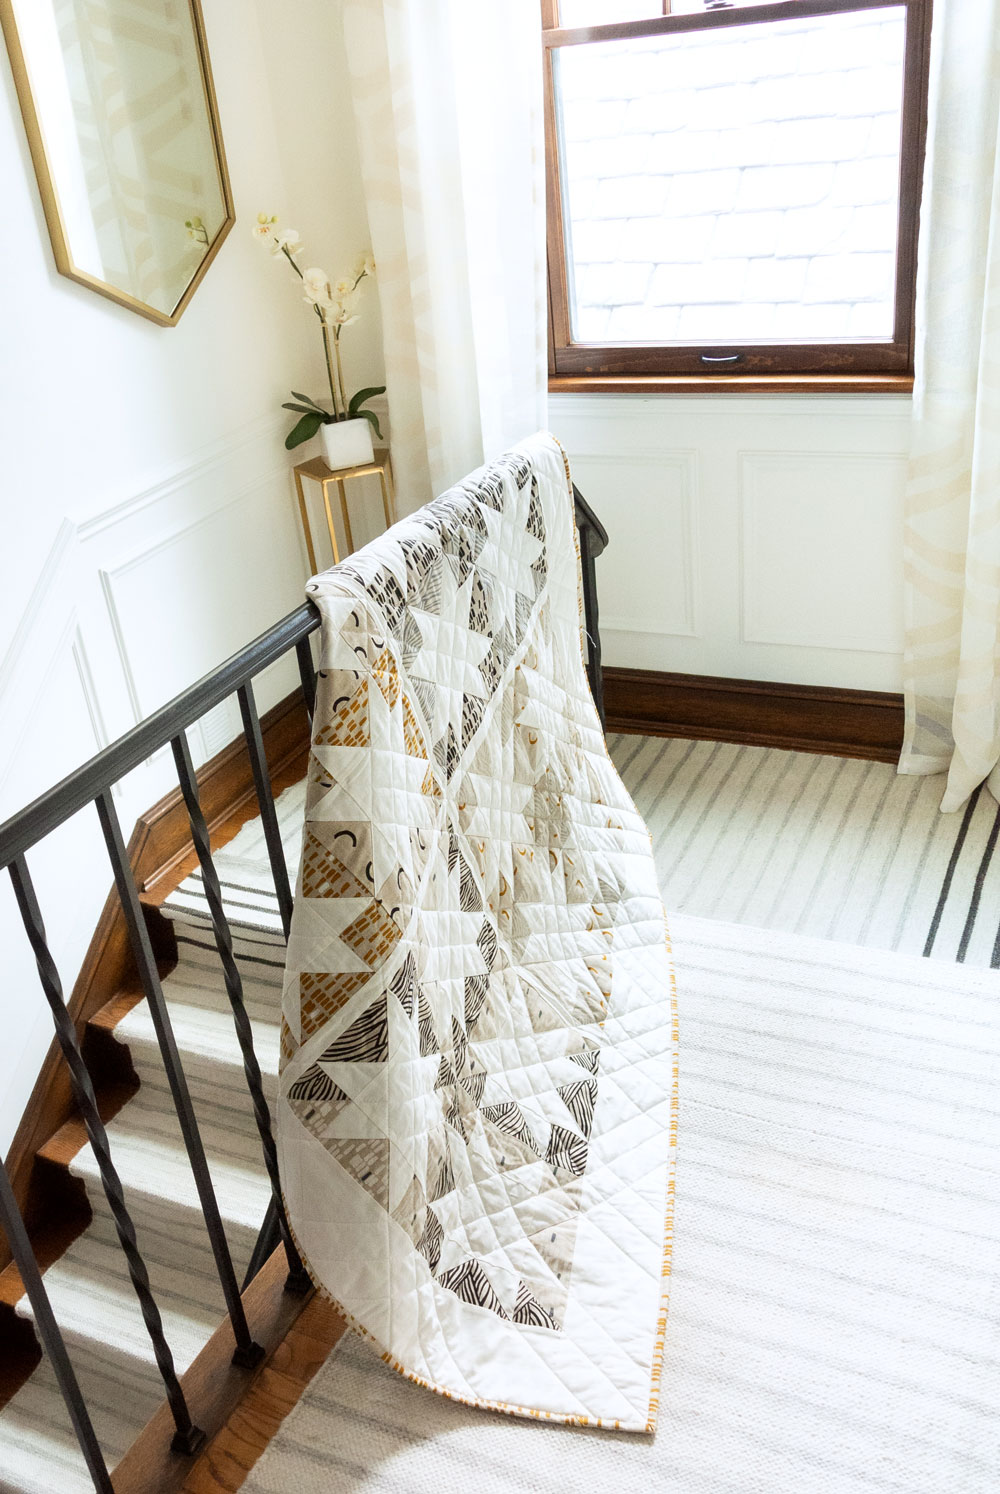 Make a sophisticated, neutral quilt using the Stars Hollow quilt pattern. This is a classic quilt pattern, but with a modern twist. The design plays on negative space to create traditional sawtooth star quilt blocks. suzyquilts.com #homedecor #quiltpattern